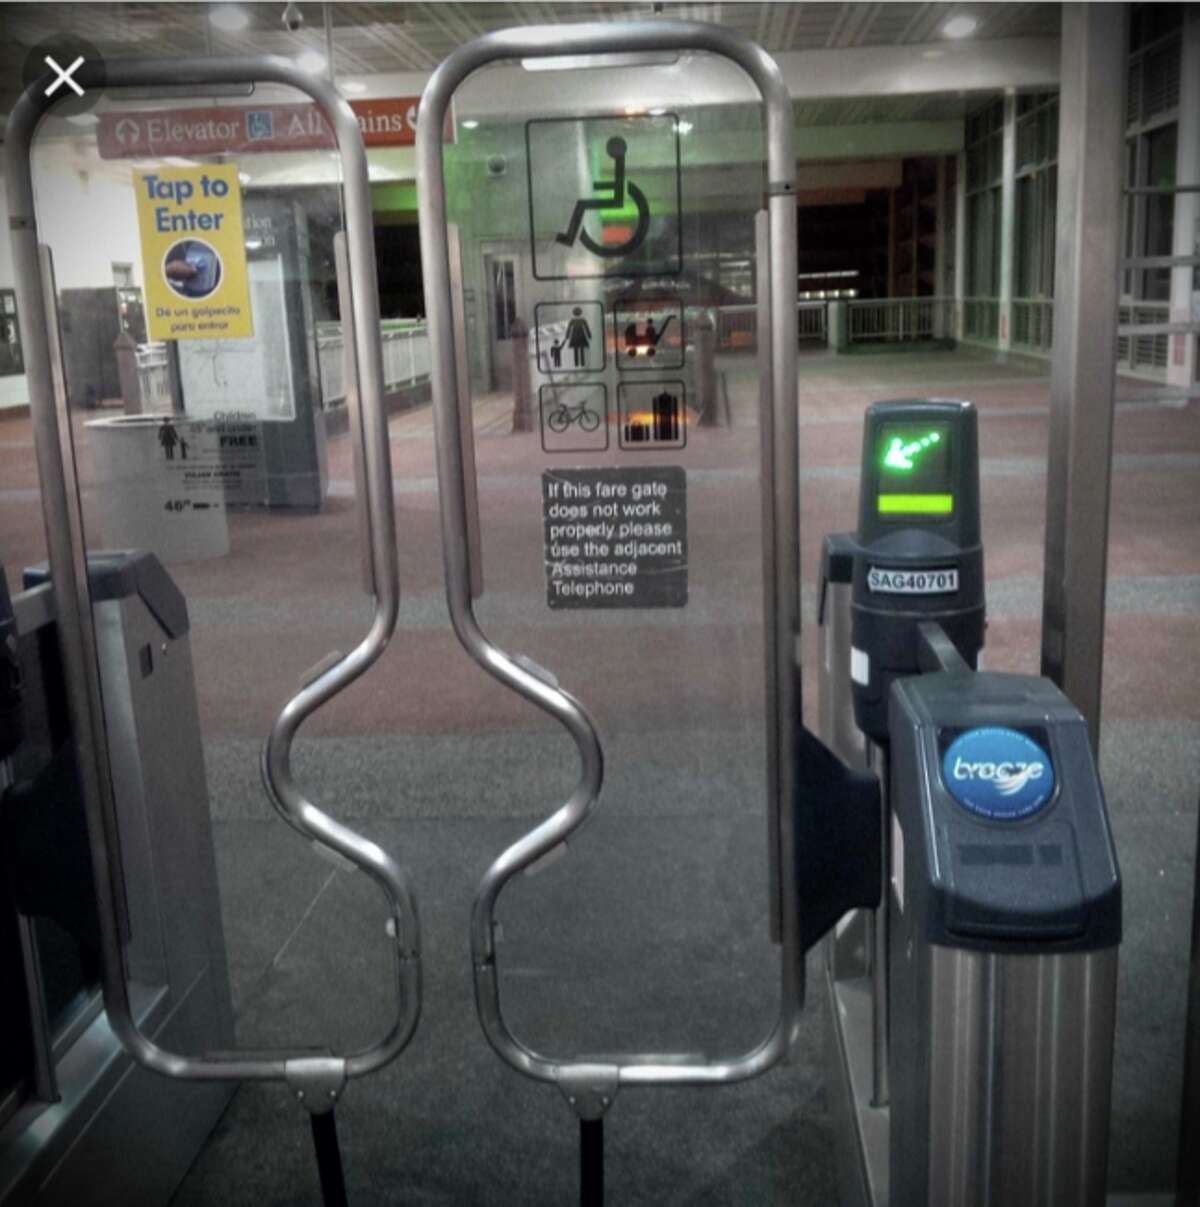 These three styles of gates were in consideration to replace BART's current fare gate. This swing-style gate was selected in a Thursday BART meeting.